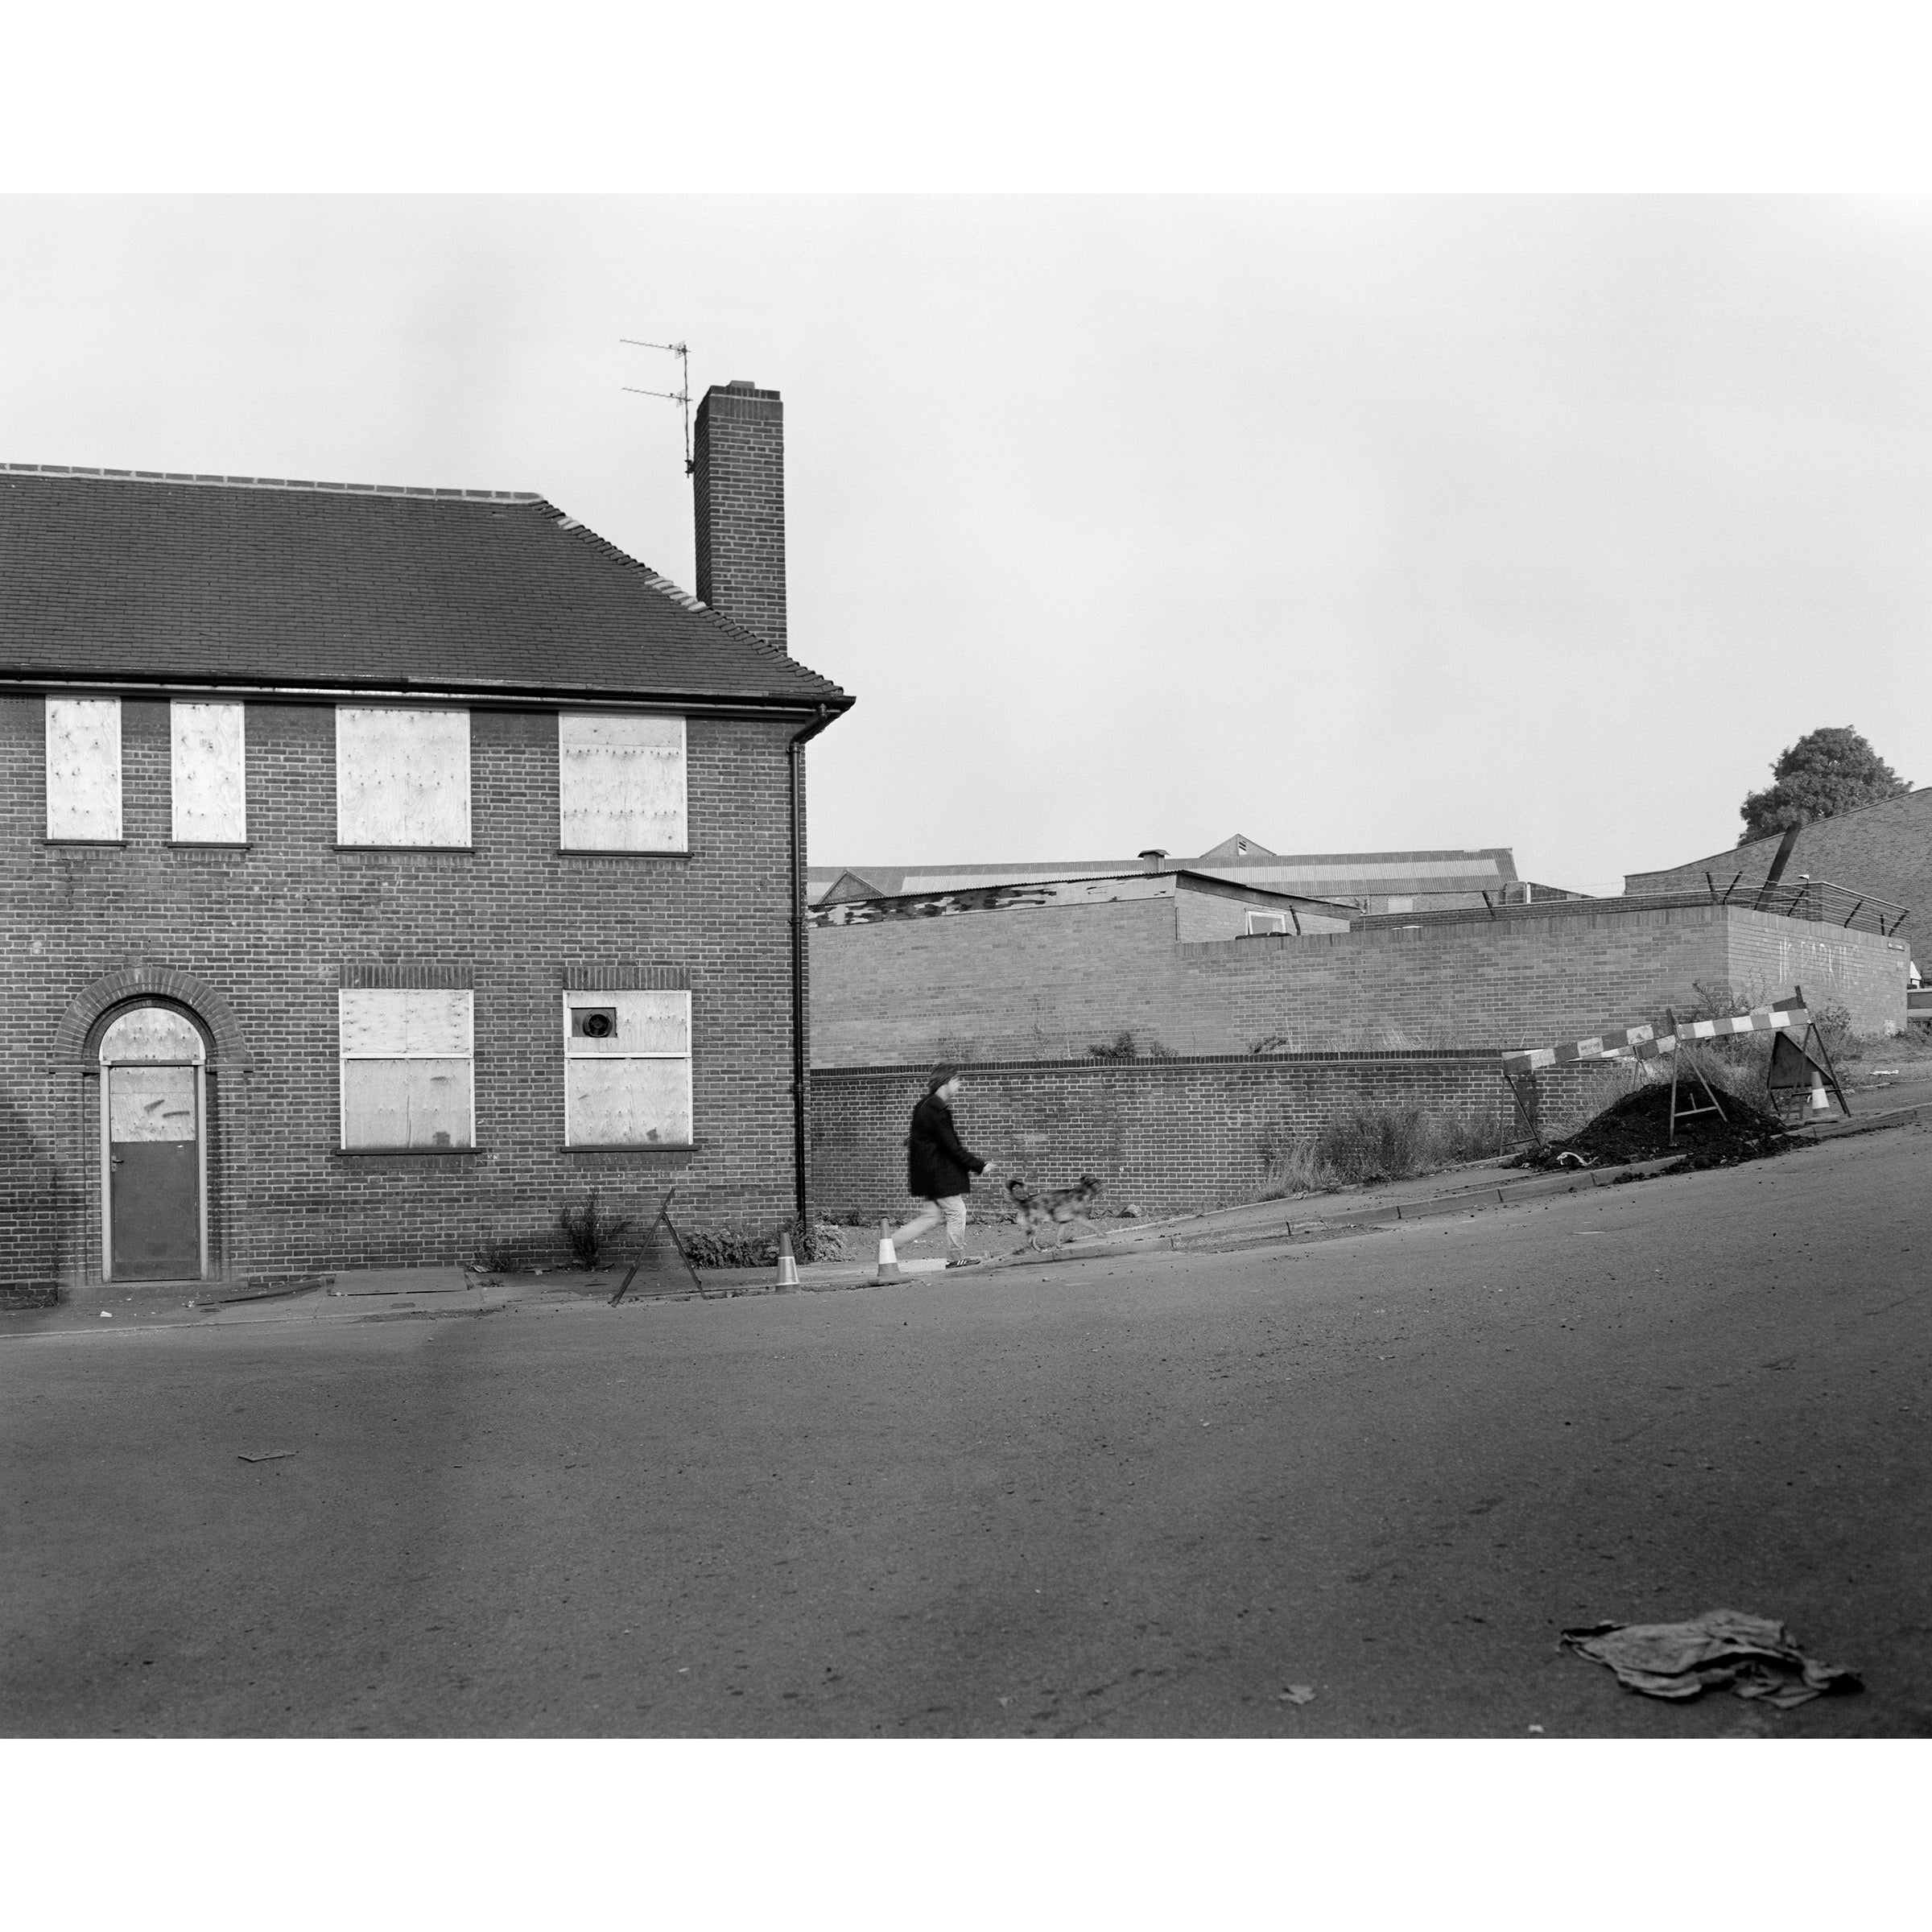 Boarded-up public house, 1985